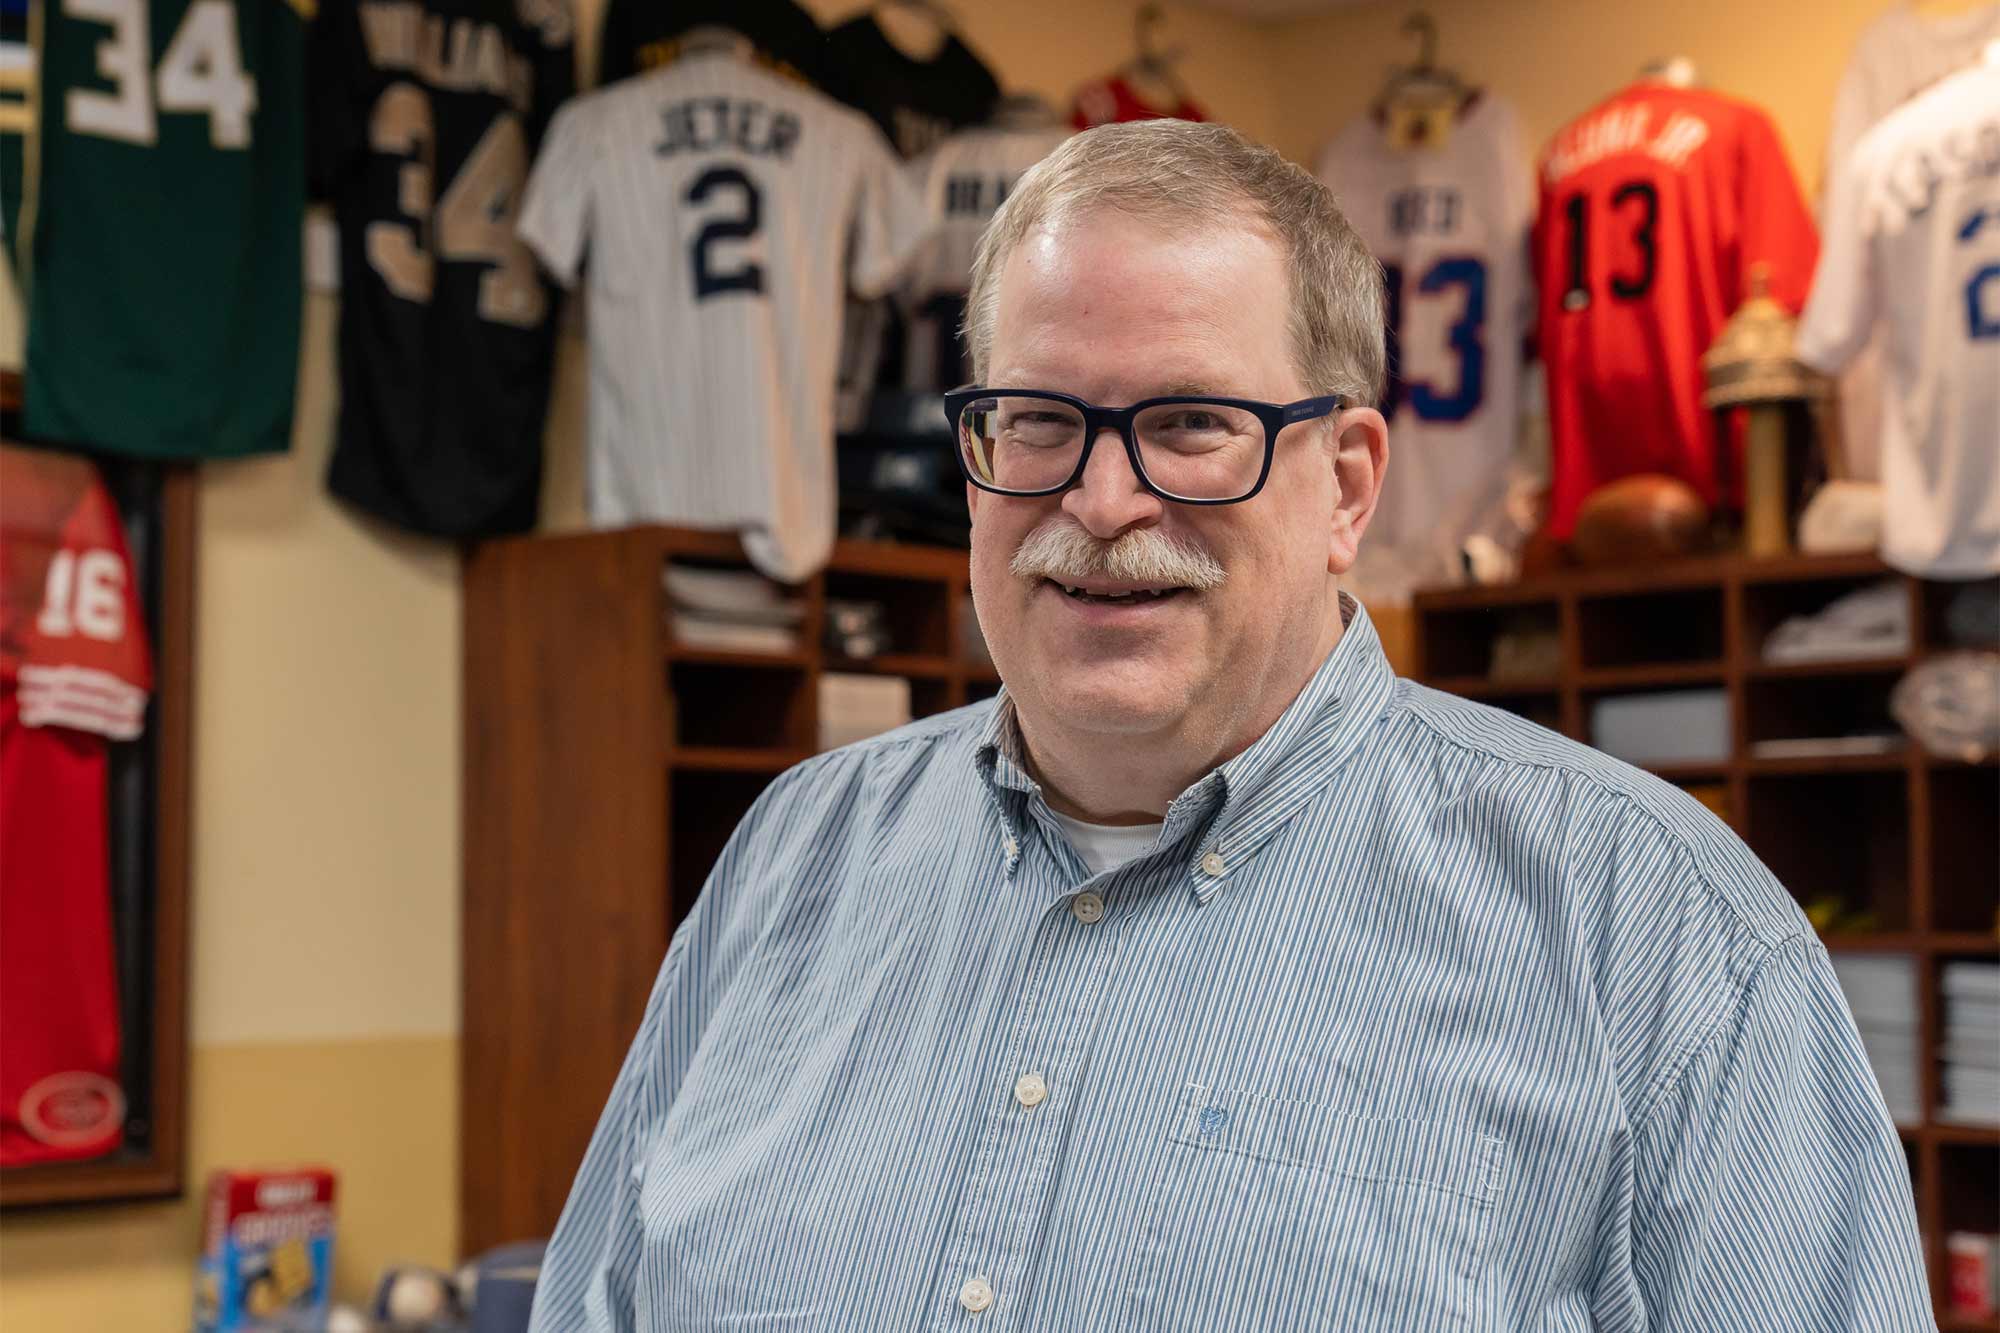 Jeff Prillaman stands in his shop in front of shelving units and multiple sports jerseys hanging on the wall